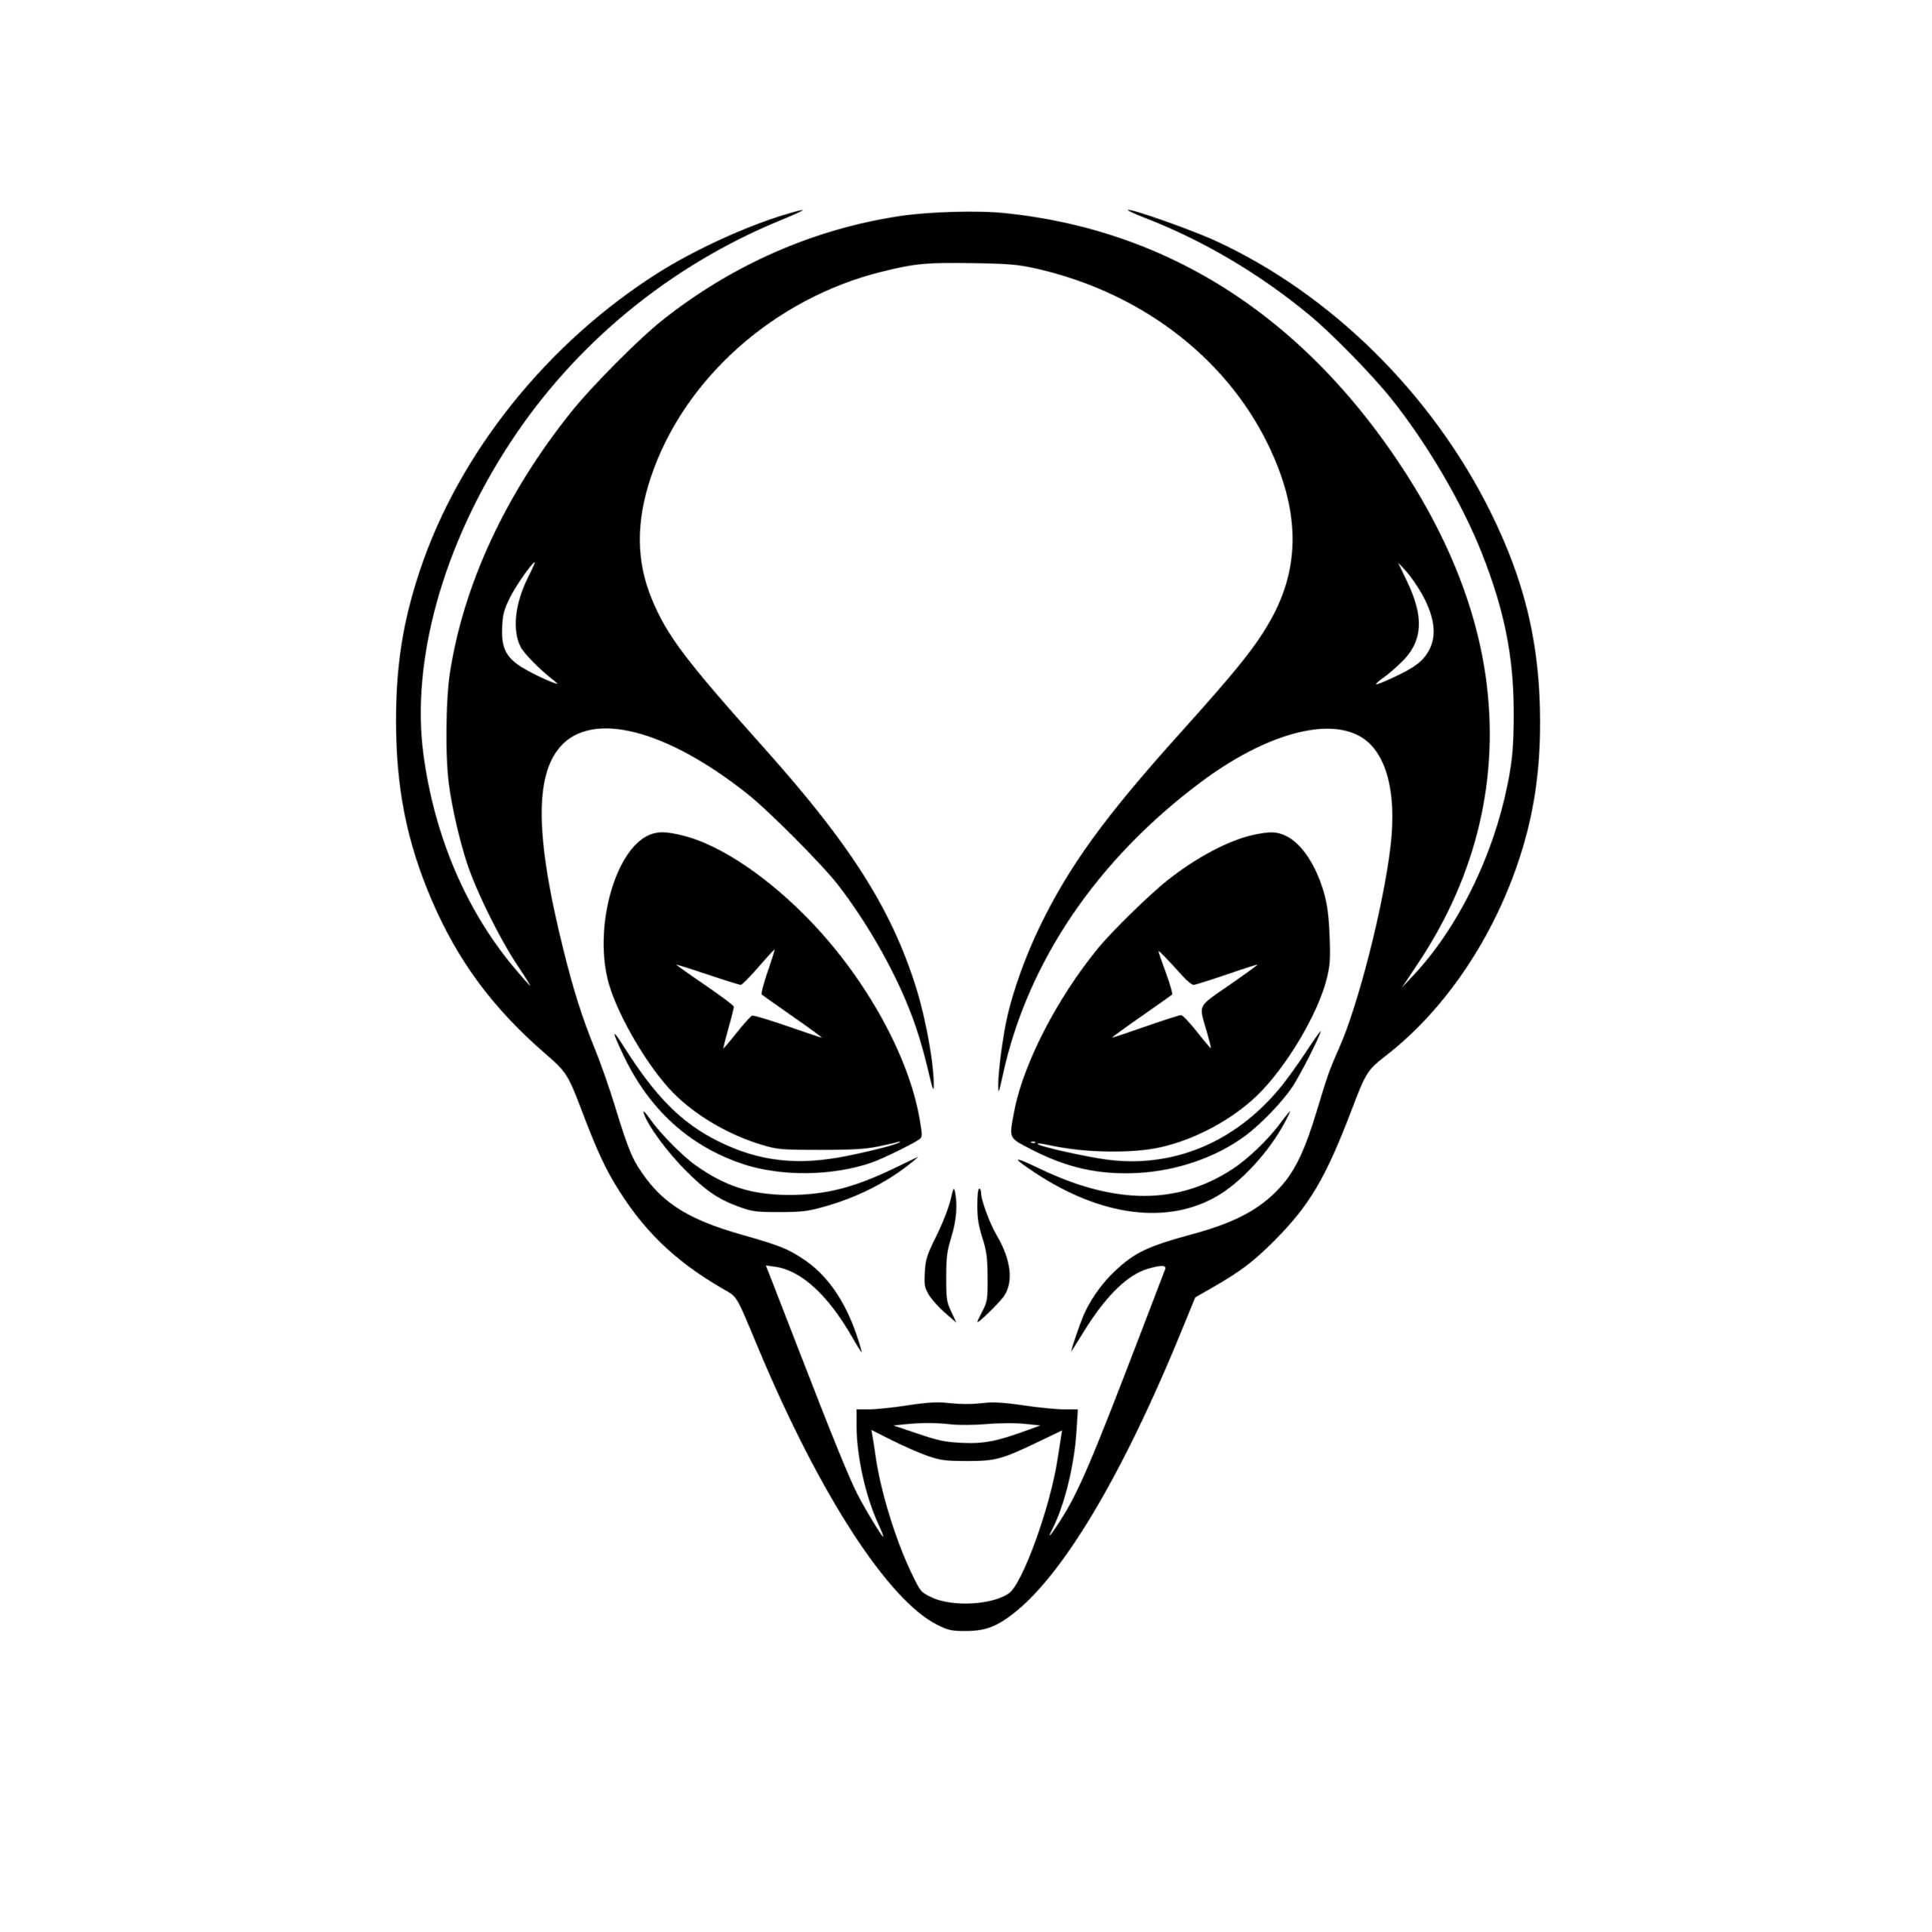 Instant Download Alien Star Eyes SVG, PNG, DXF Files for Cricut, Silhouette